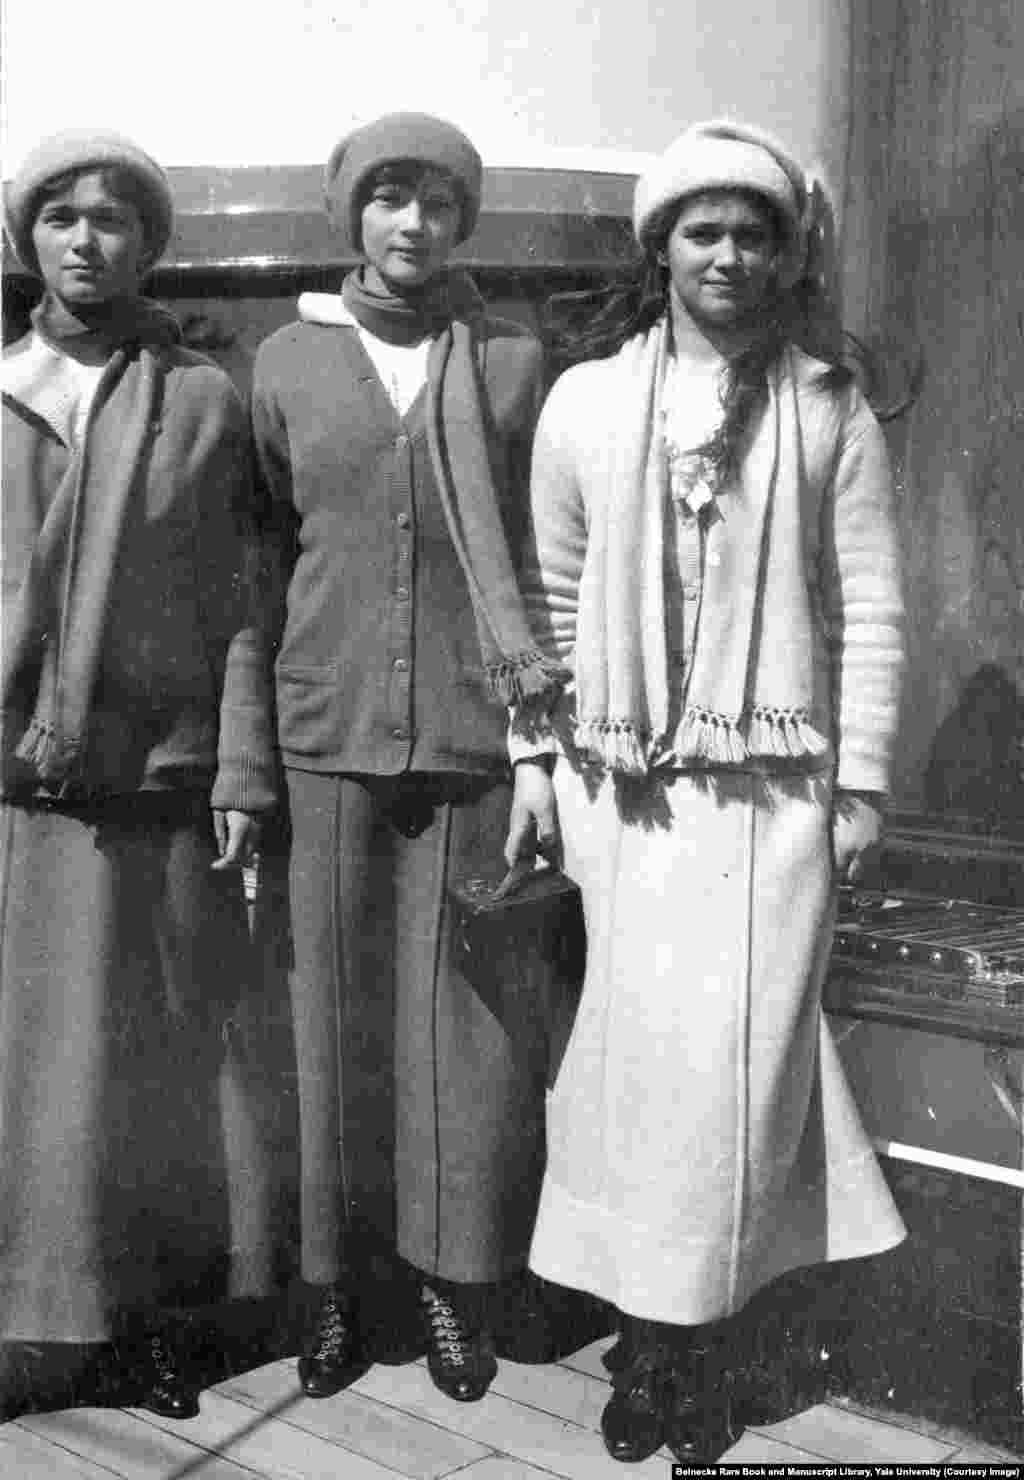 Grand Duchesses Olga, Tatyana, and Maria aboard the Standart in 1914. The sisters were 22, 21, and 19 years old when they were killed.